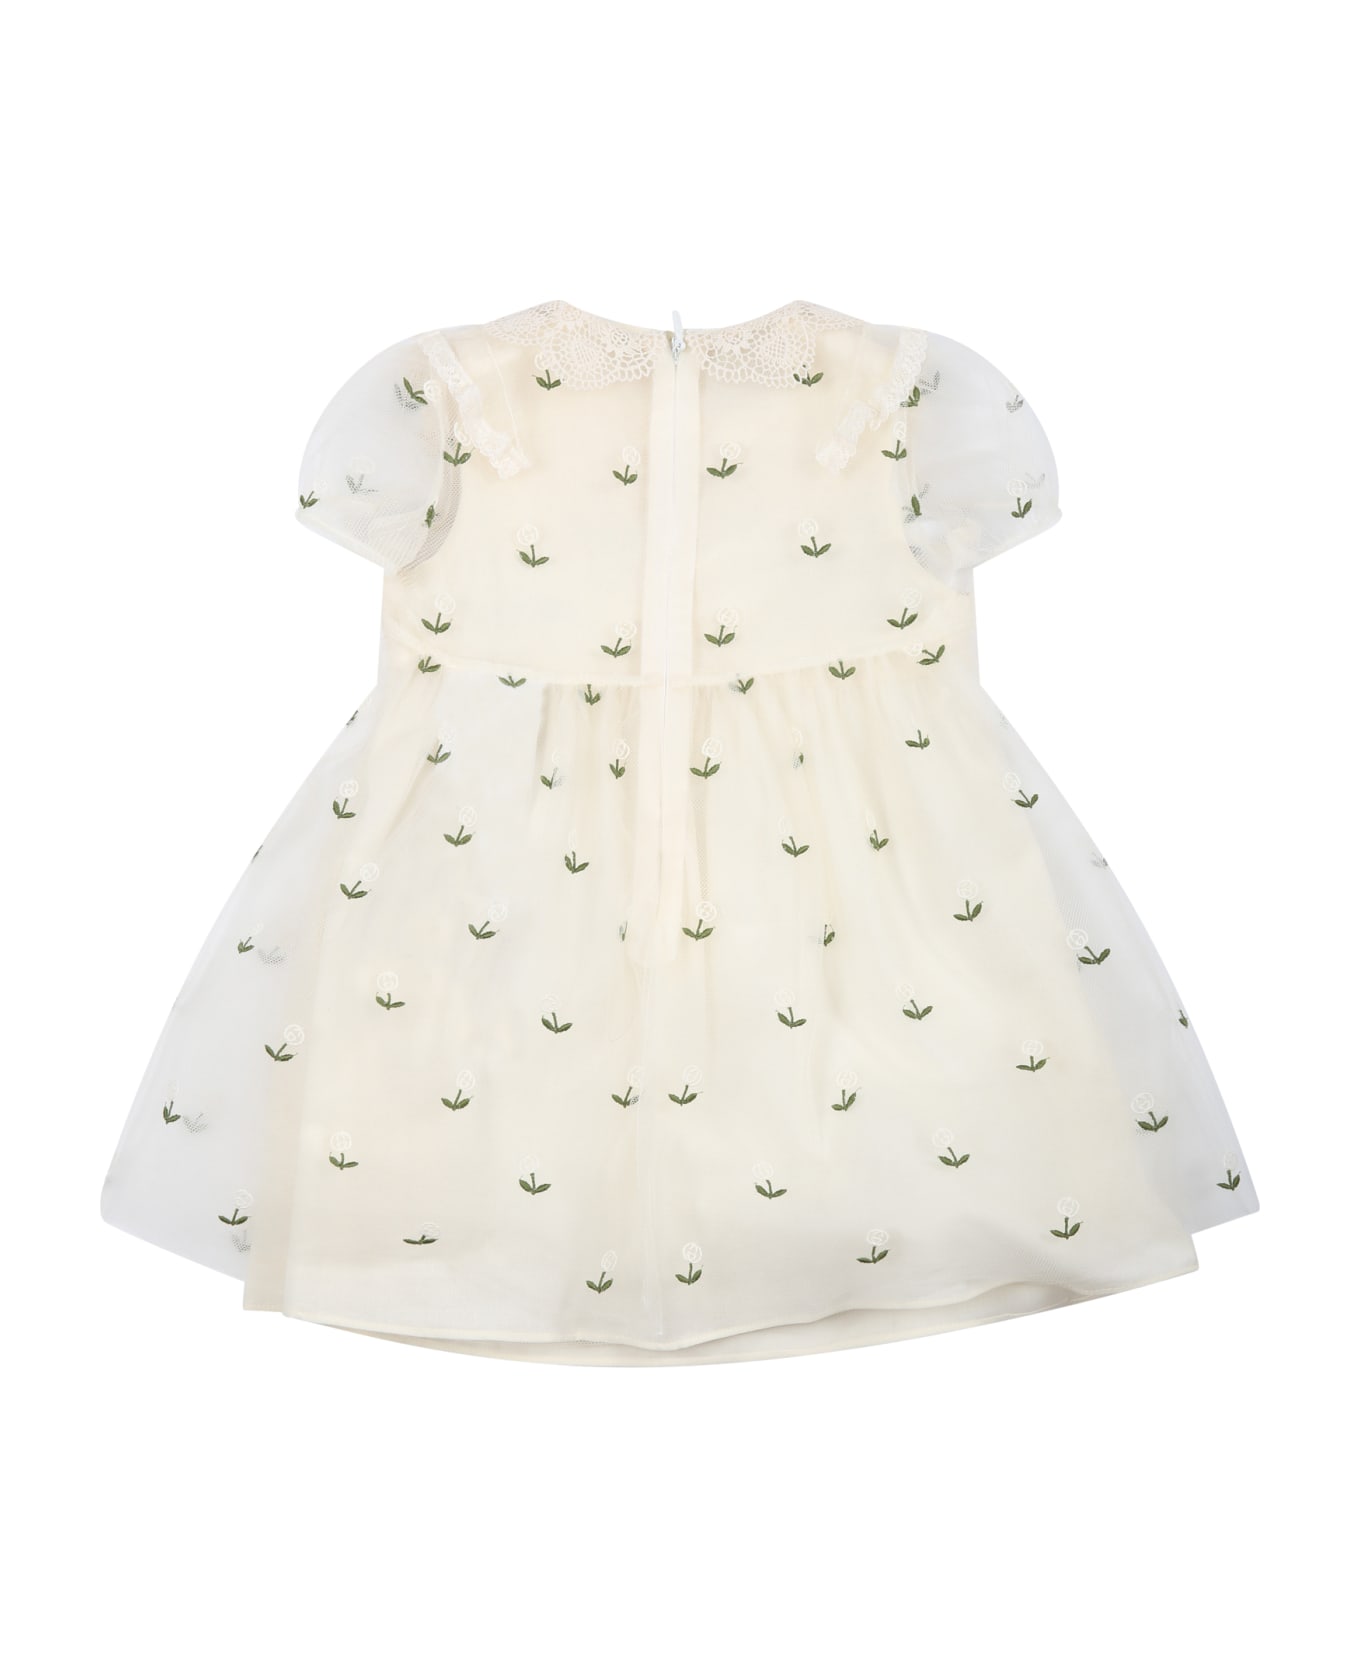 Gucci Ivory Dress For Baby Girl With All-over Embroidered Flowers And Logo Gg - Ivory